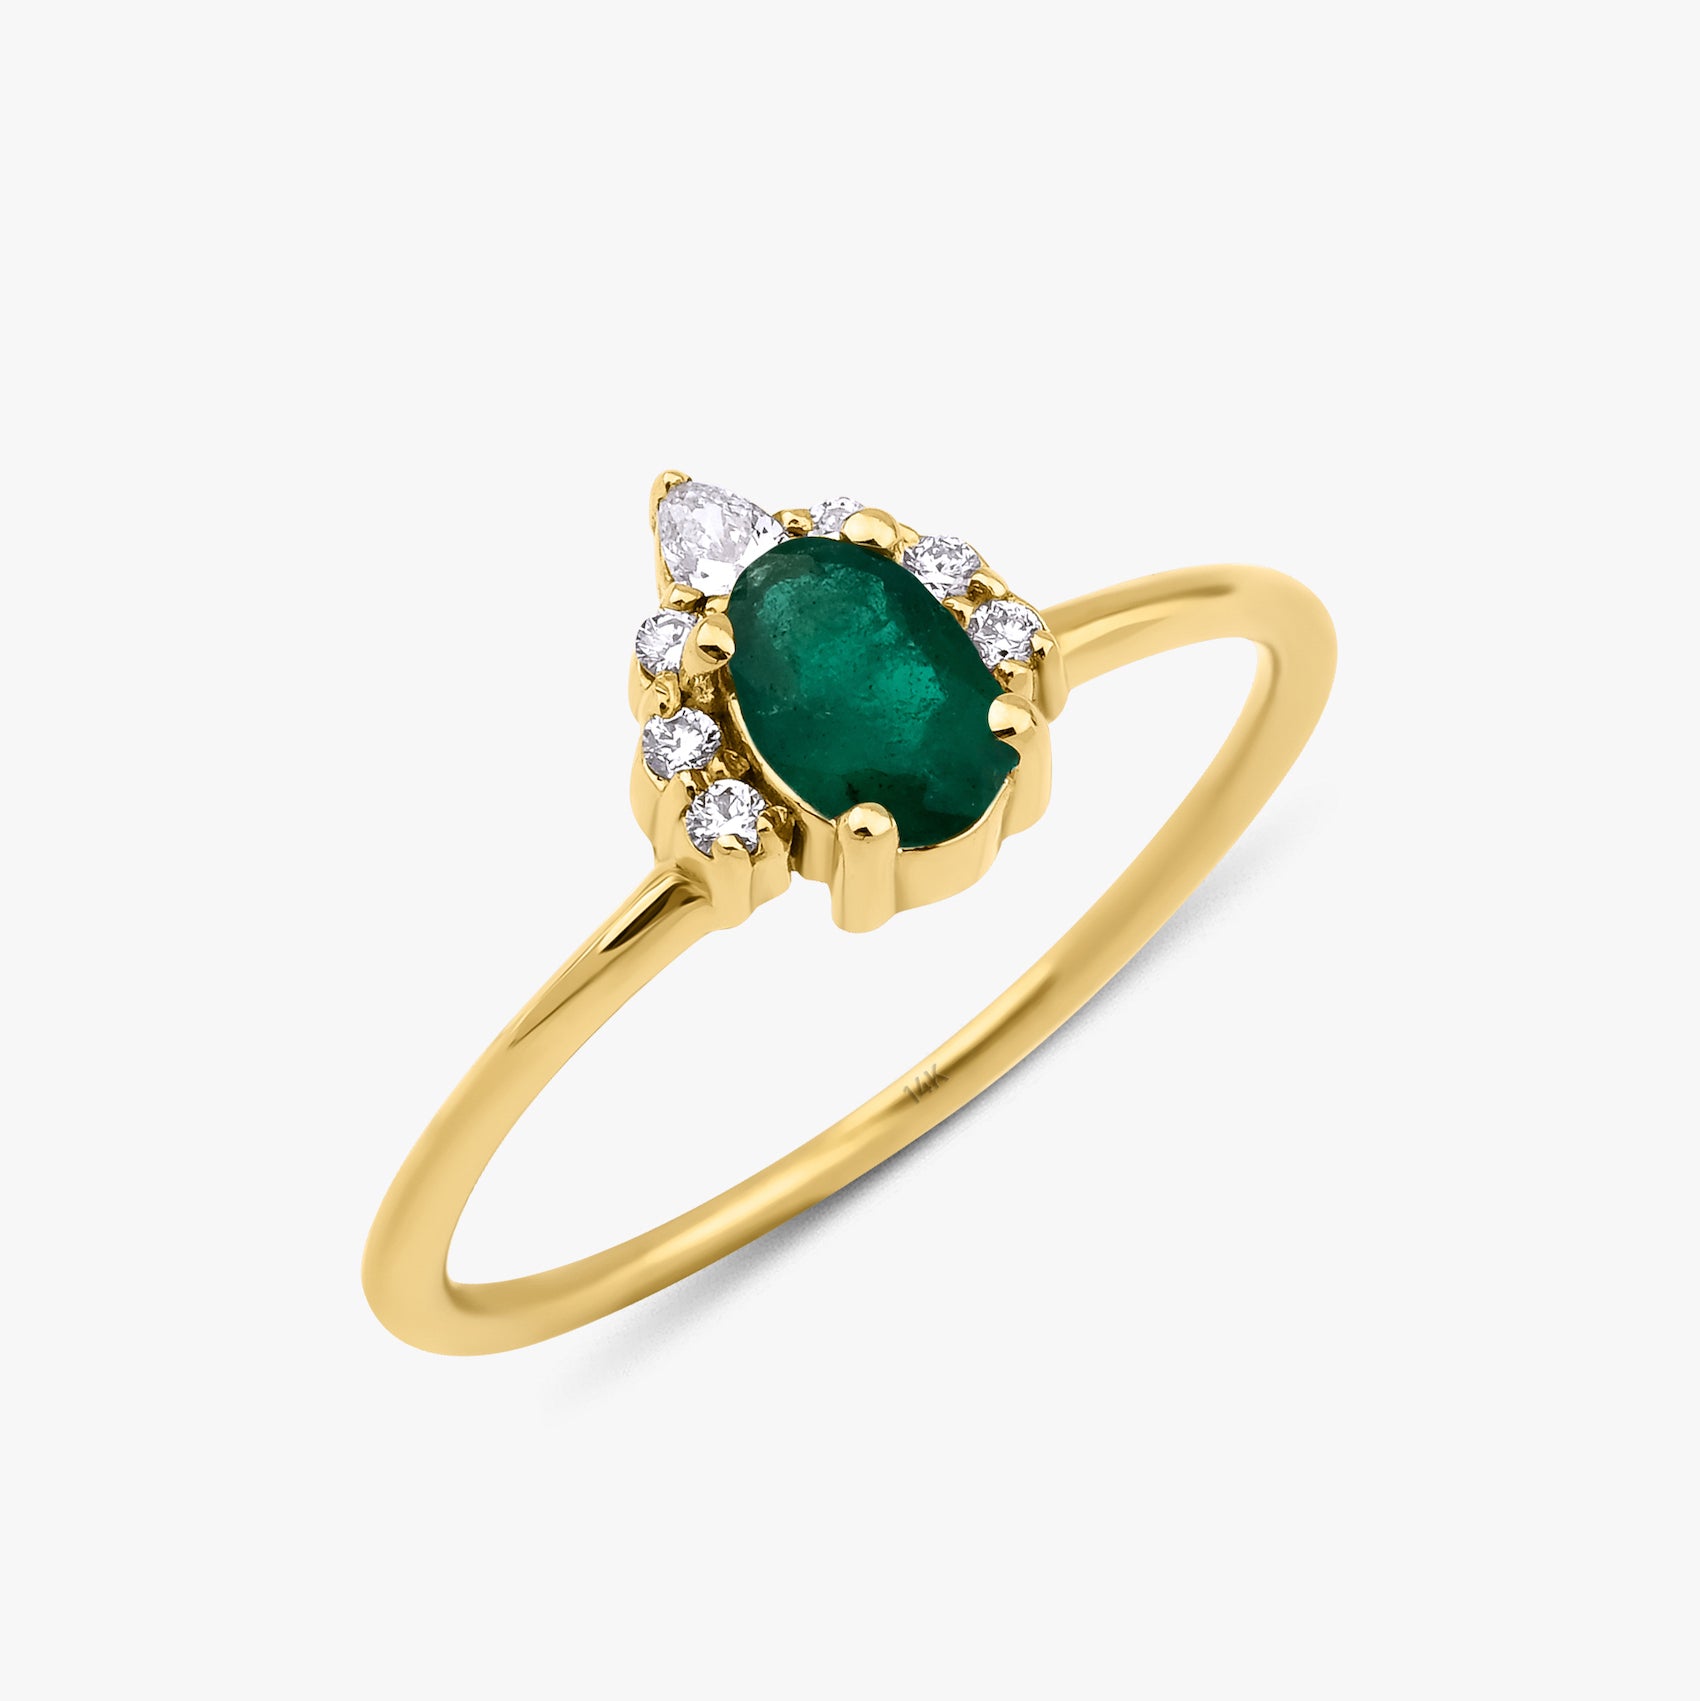 Oval Emerald and Diamond Ring in 14K Gold